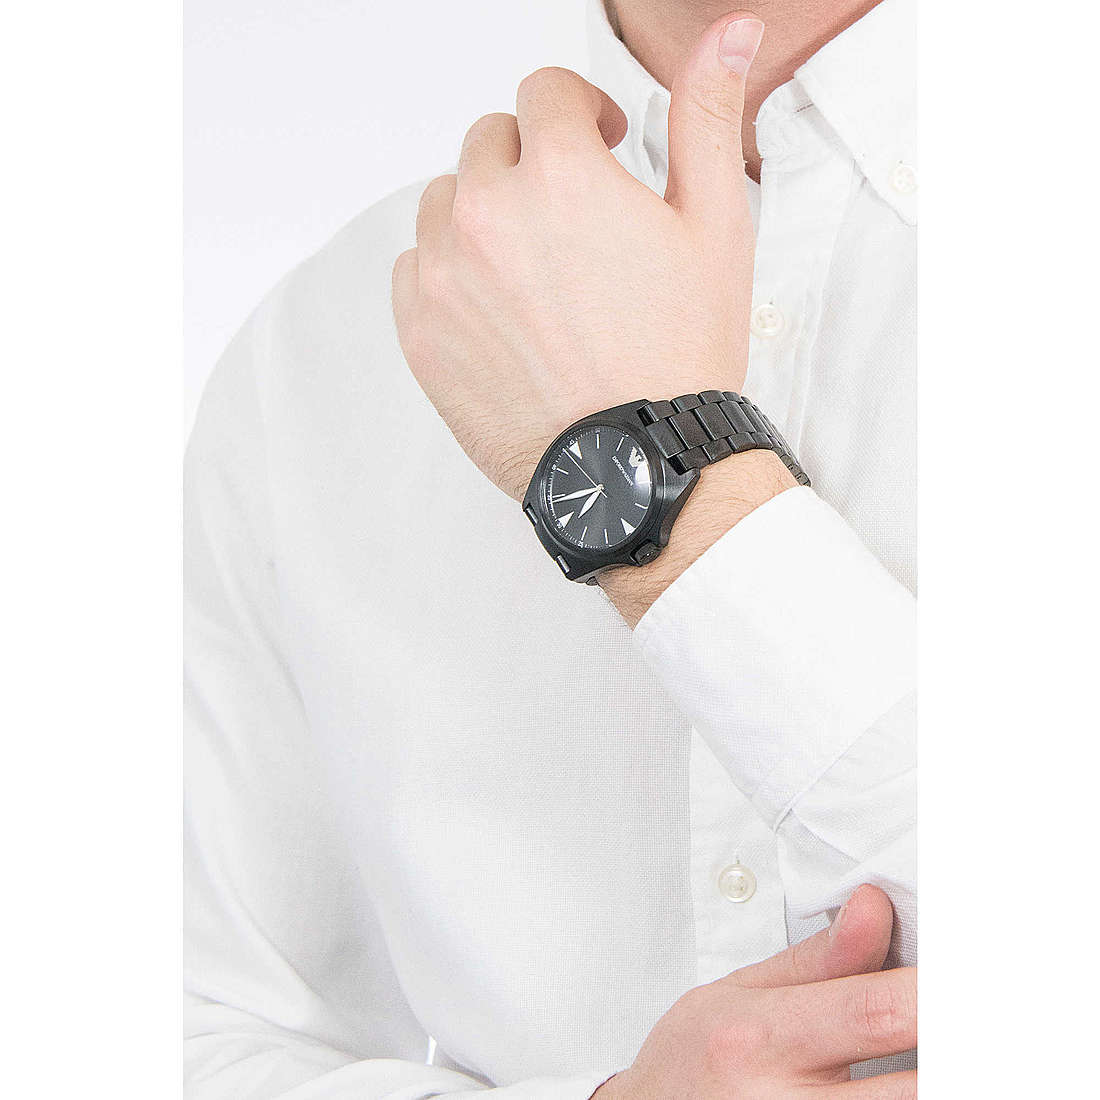 Emporio Armani only time man AR11257 wearing